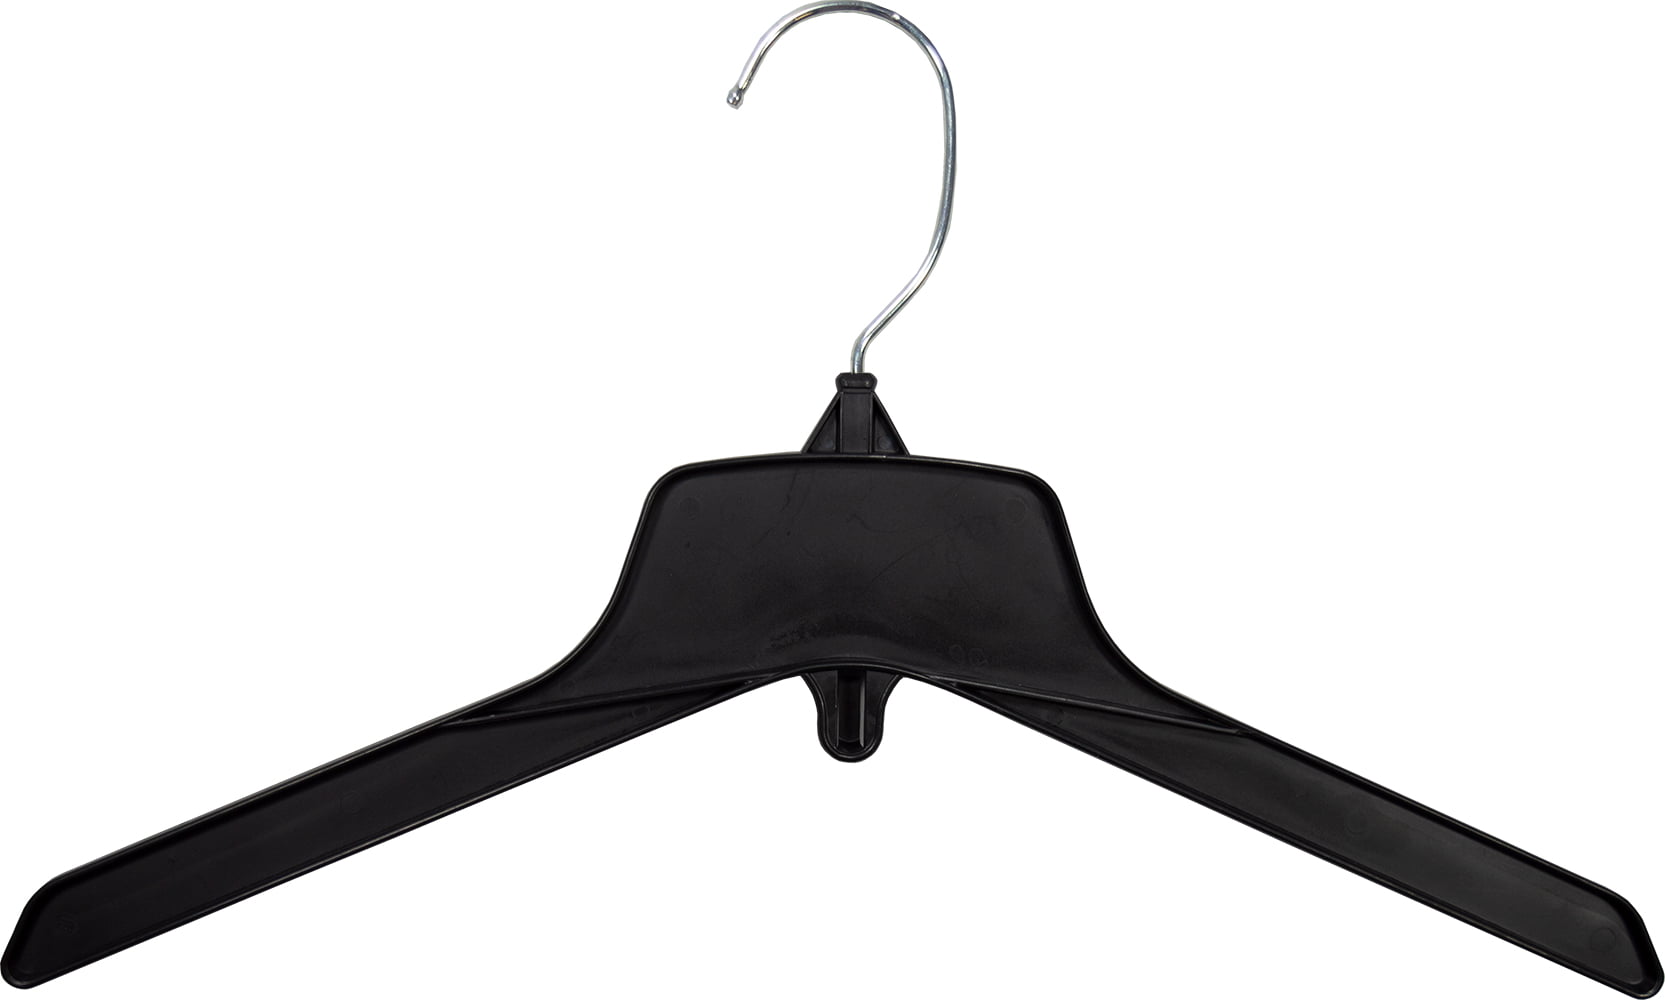 Recycled Stackable Black Plastic Coat Hanger, (Box of 100) 15 Inch Heavy  Duty Cascading Top Hangers with Chrome Swivel Hook